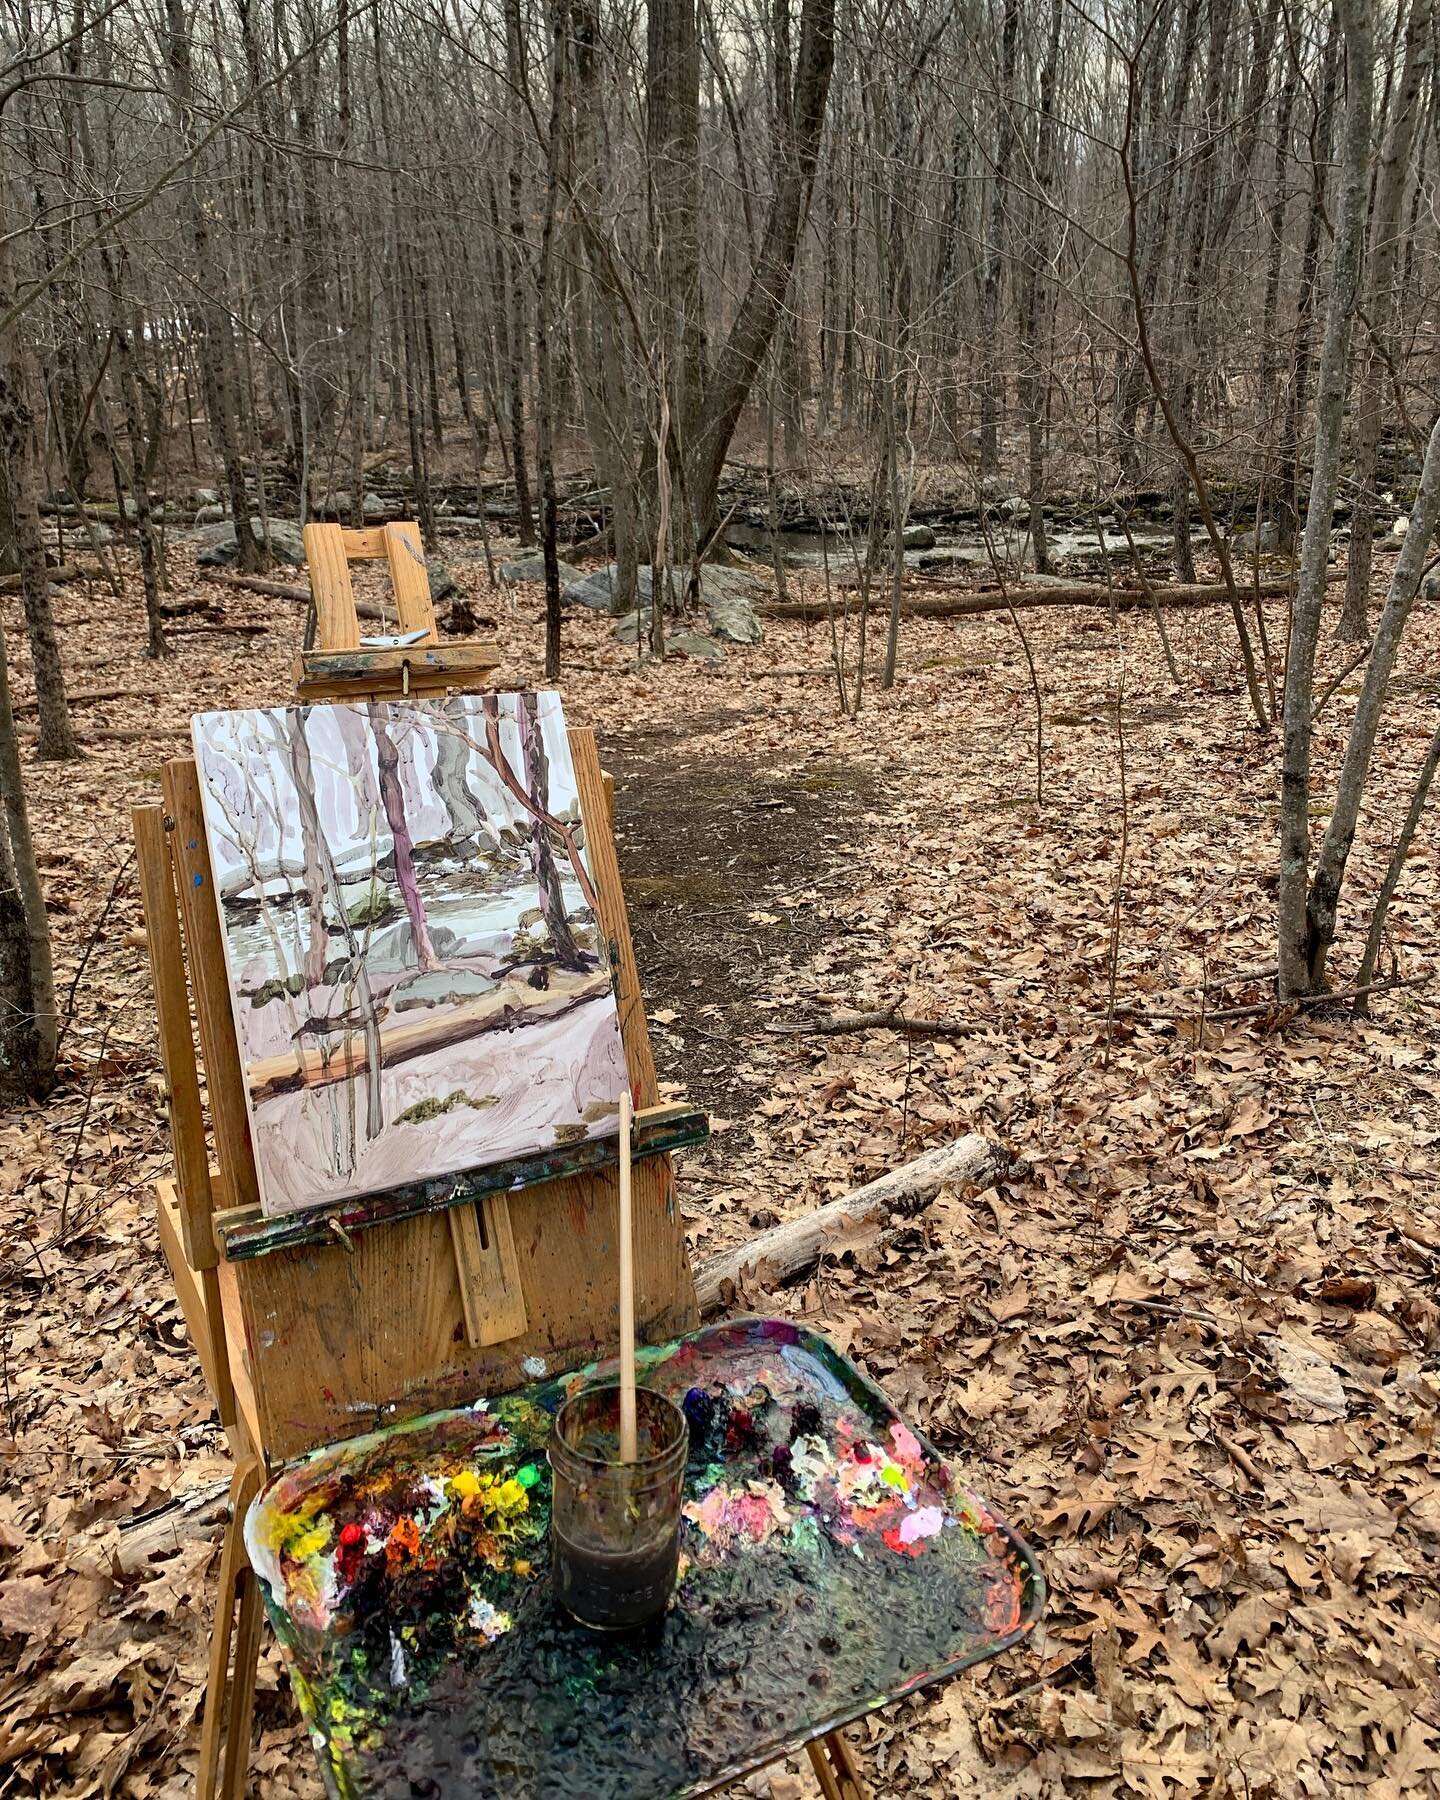 Beautiful grey painting day. The weather was in the 50&rsquo;s. I still bundle up for these temperatures because when I stop moving for a couple of hours I get cold. 

I love plein air painting because working in the elements is uncomfortable and thi